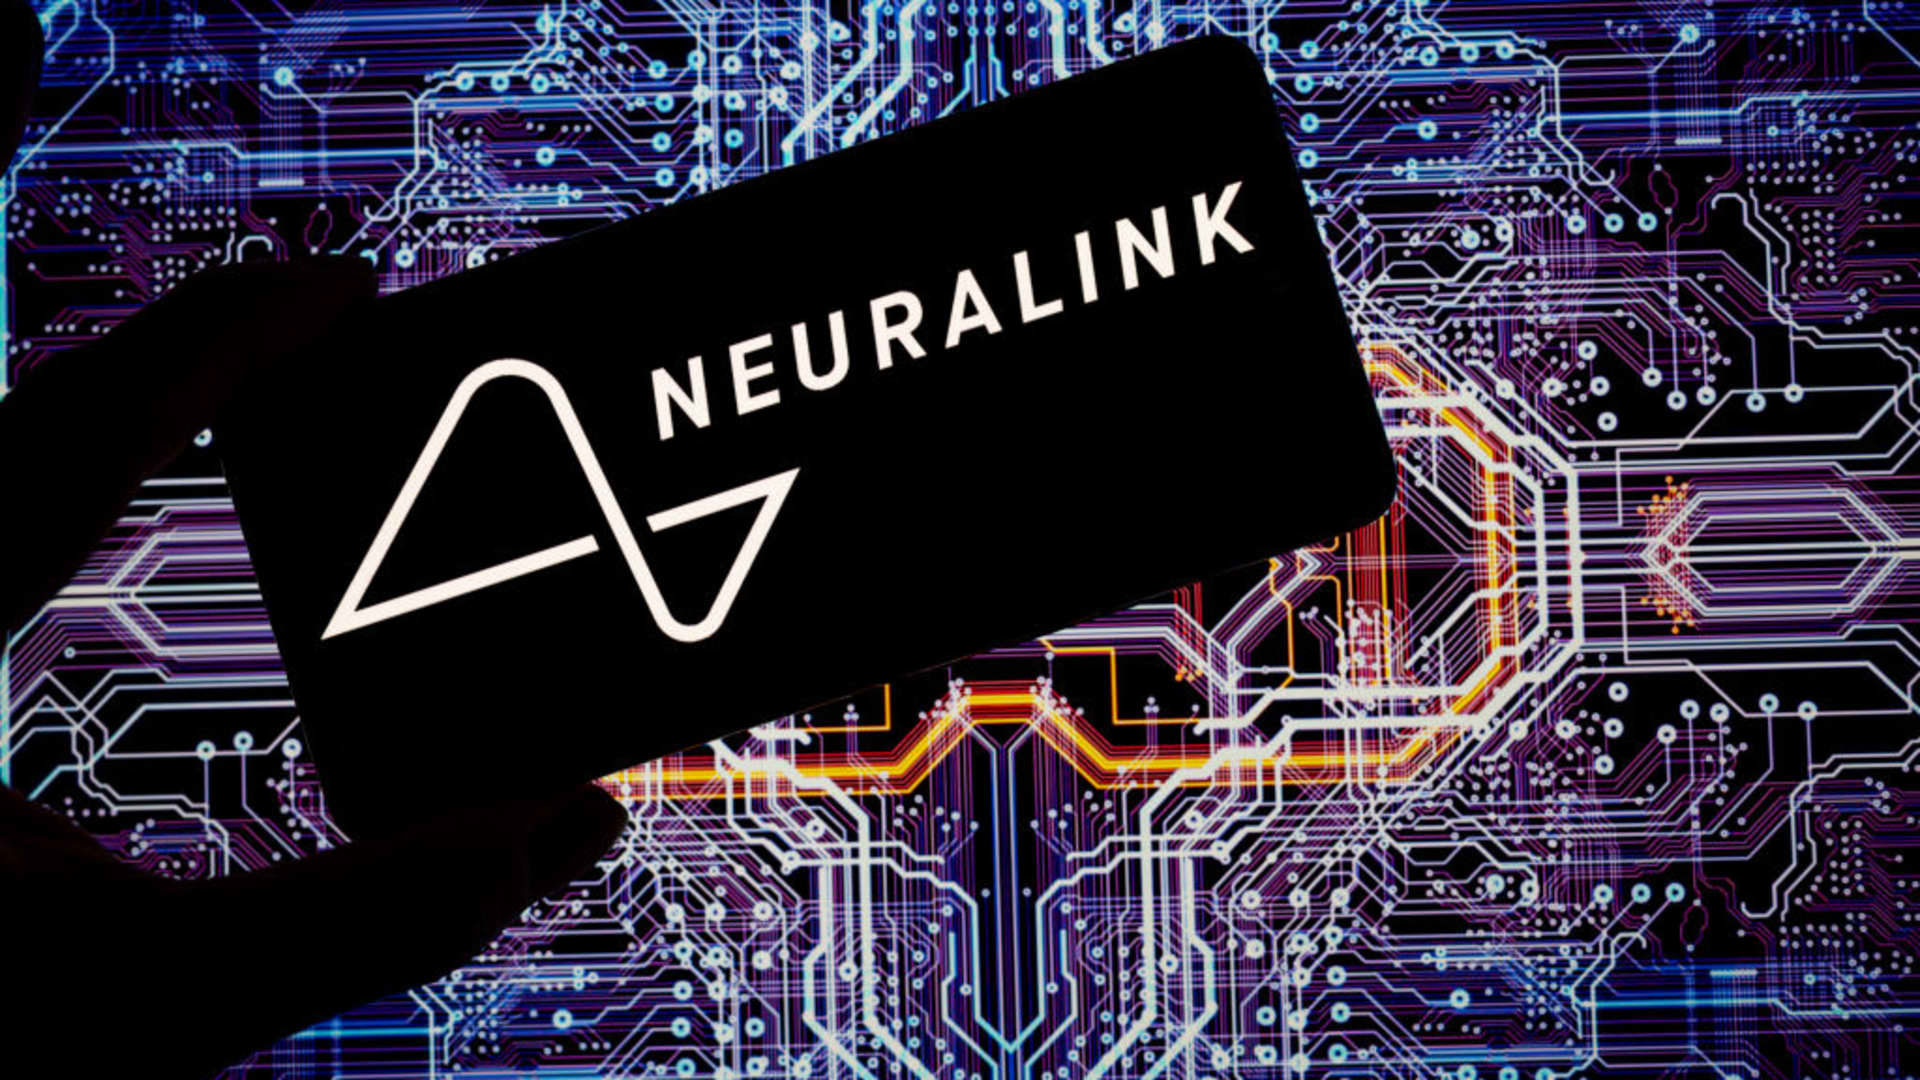 Neuralink’s first in-human brain implant has experienced a problem, company